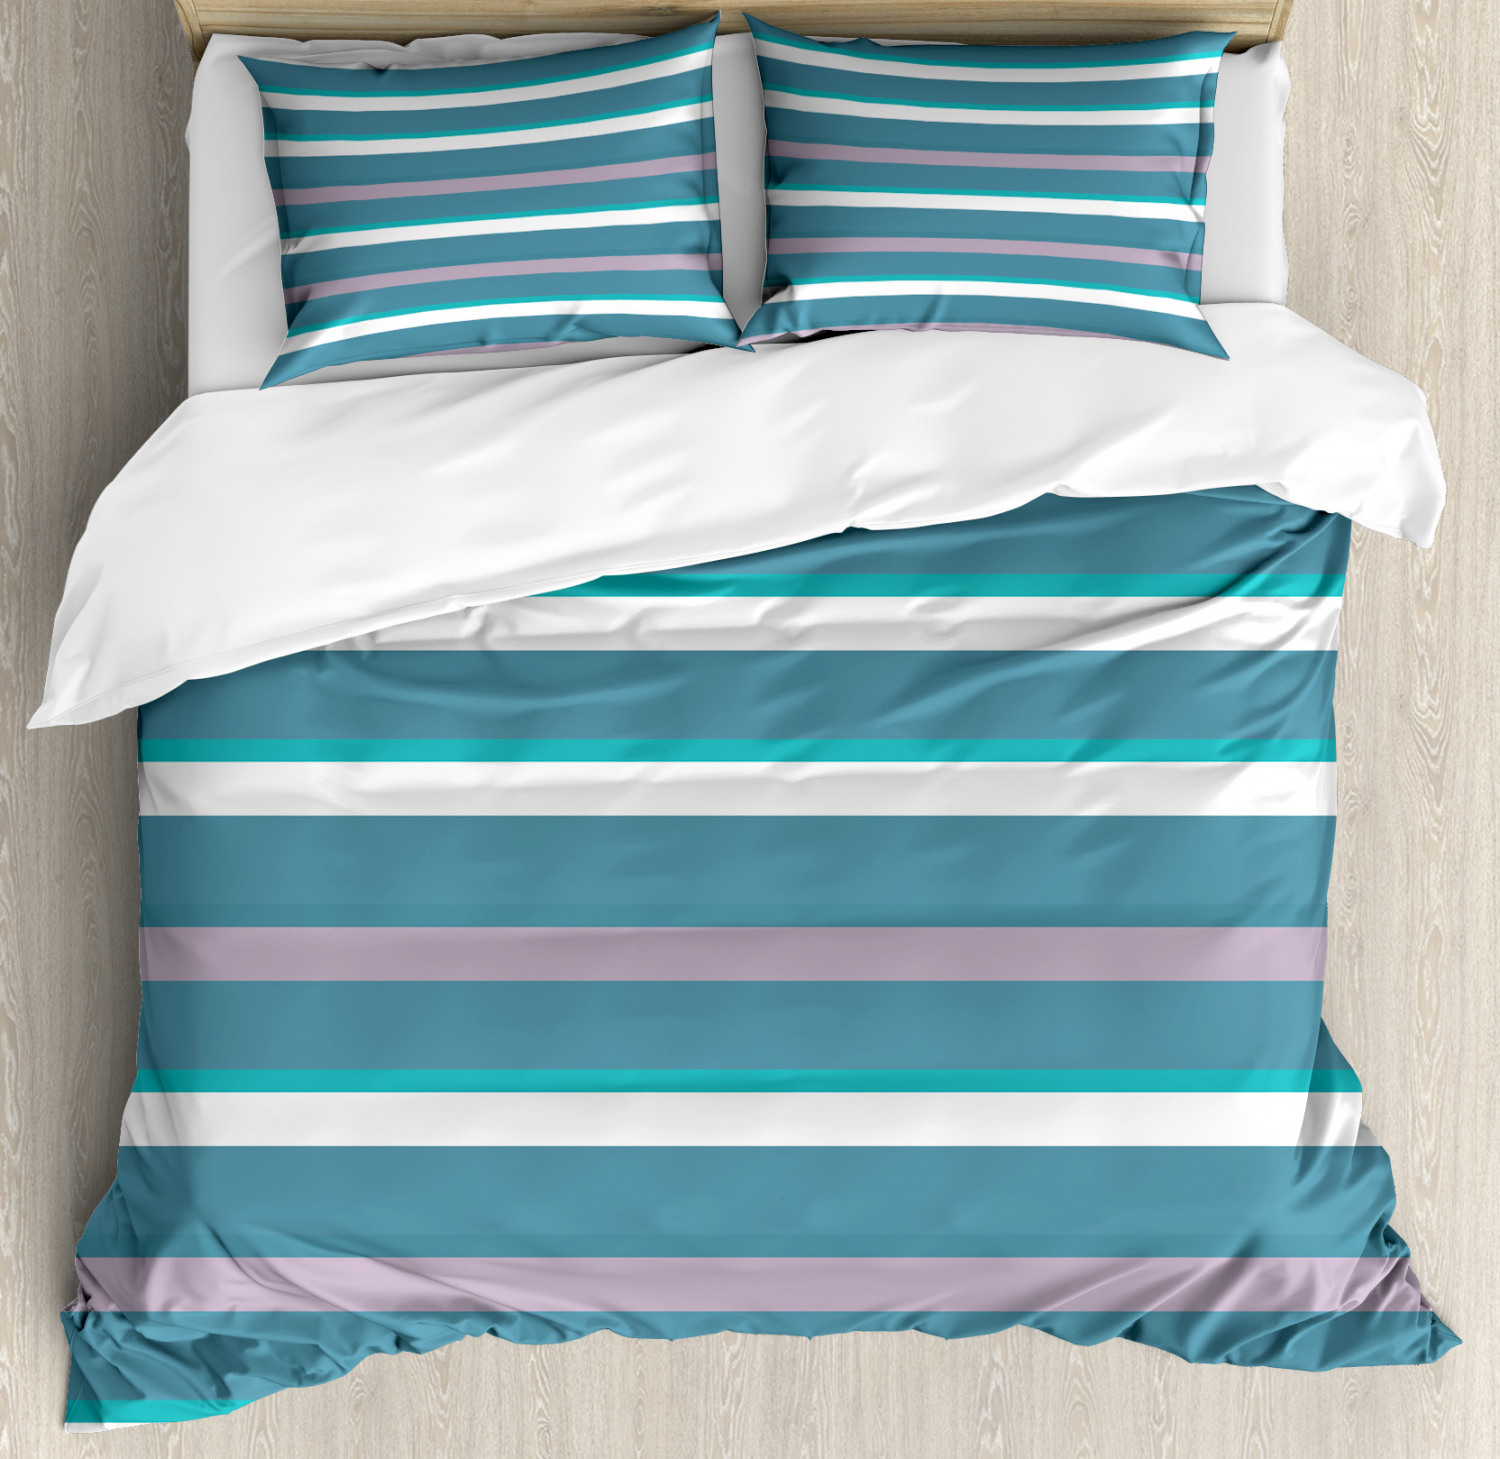 Striped Duvet Cover Set with Pillow Shams Turquoise Teal Pattern Print